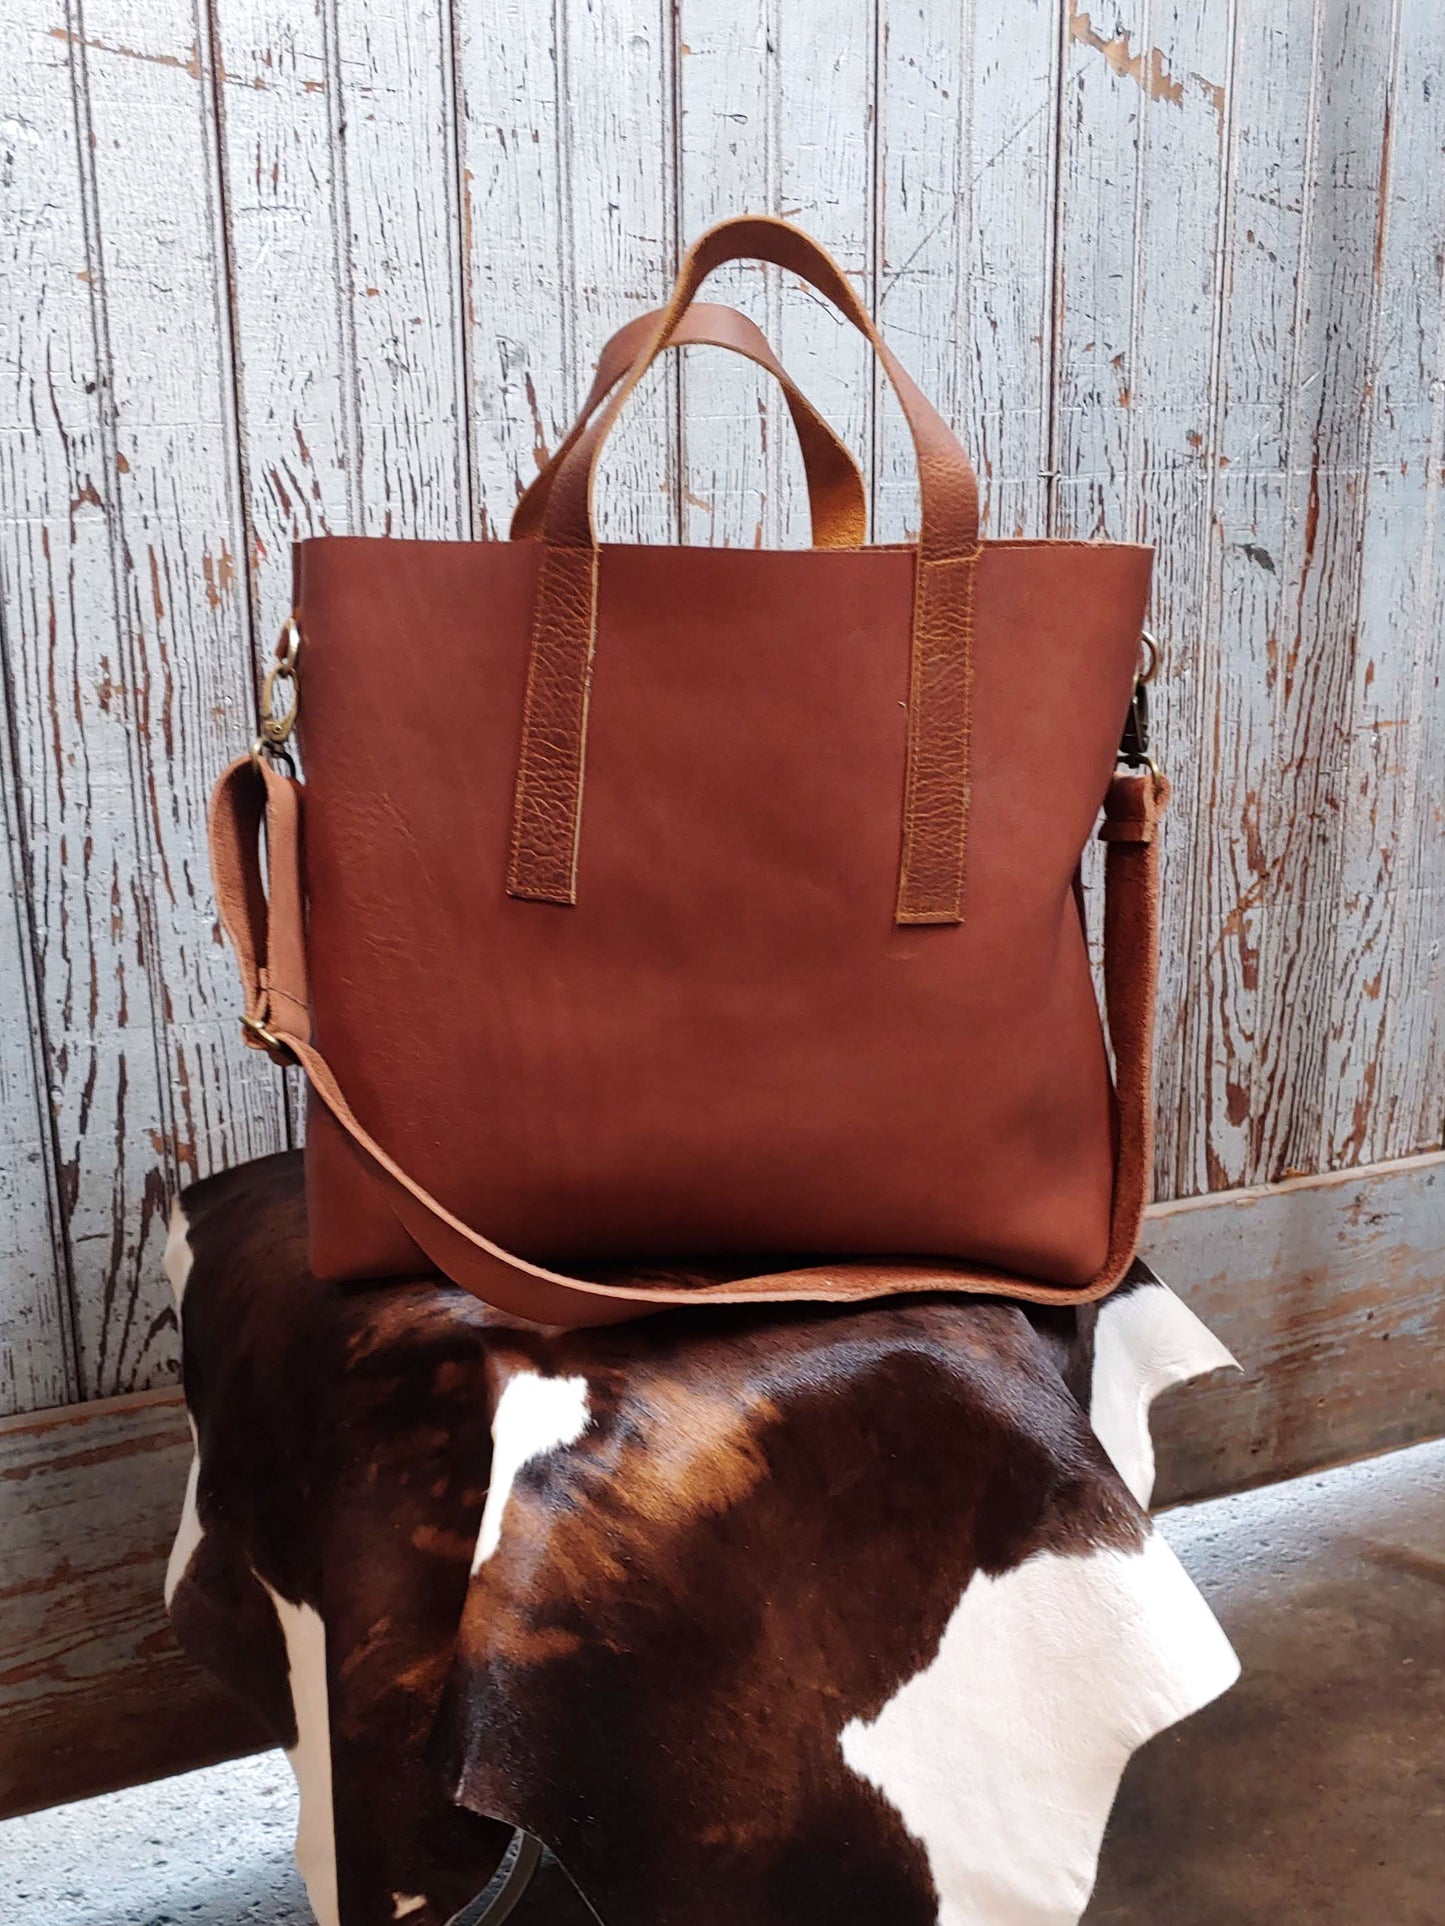 The Chicago Tote - Saddle Leather